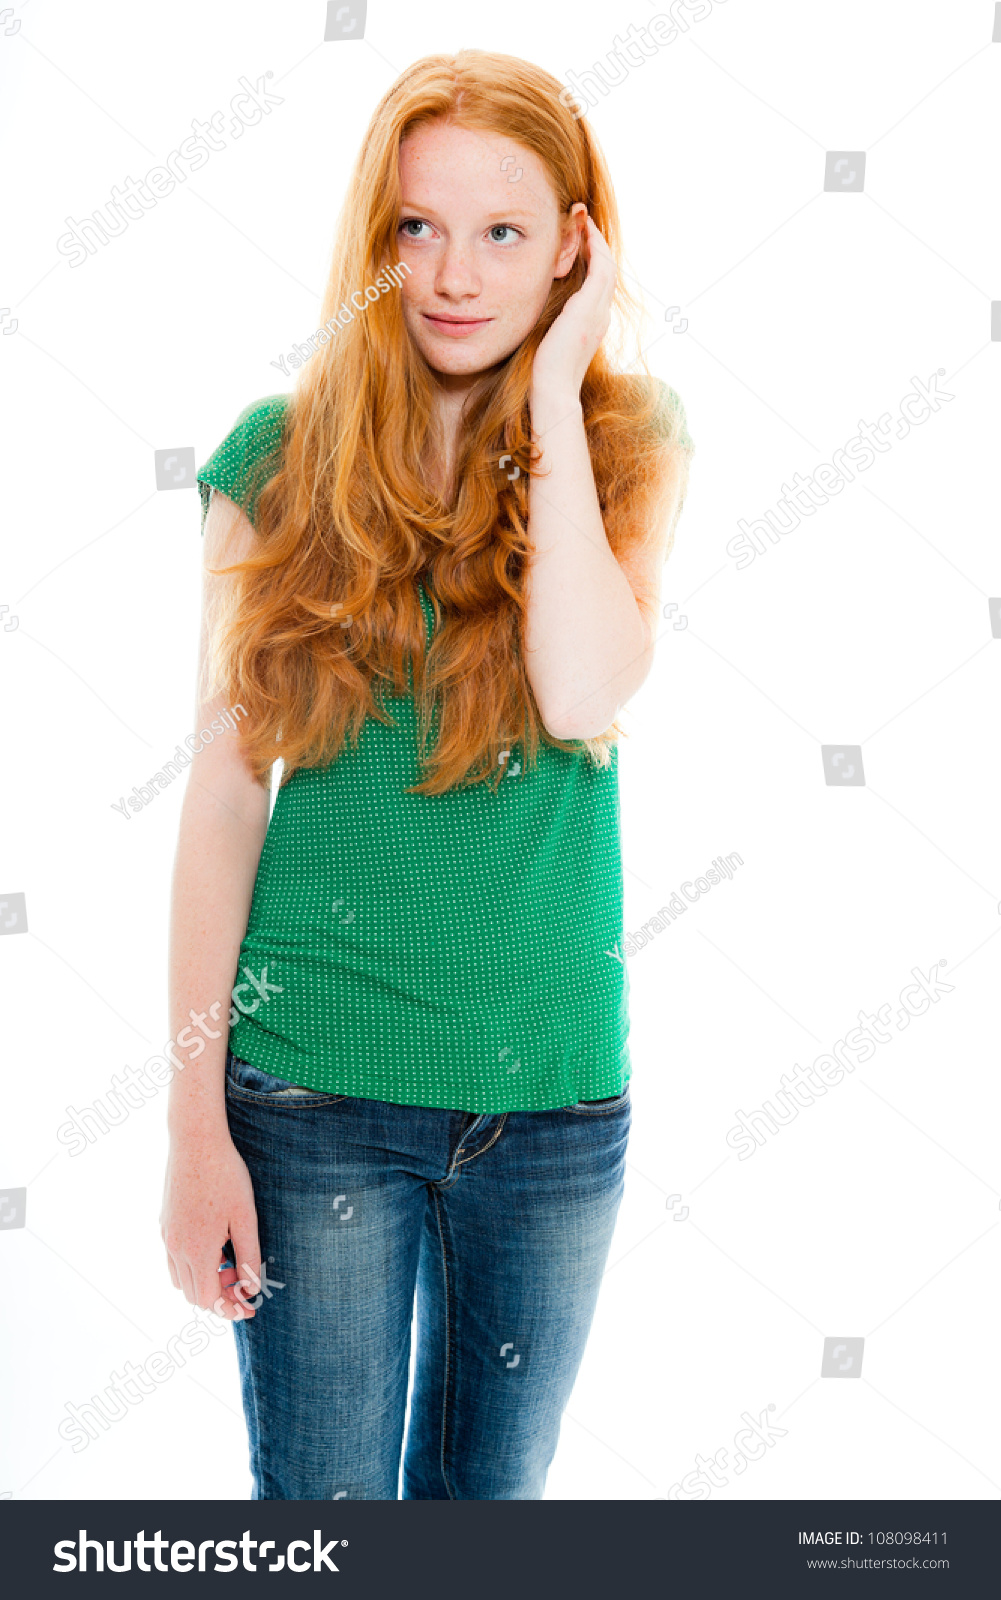 Pretty Girl With Long Red Hair Wearing Green Shirt. Natural Beauty ...